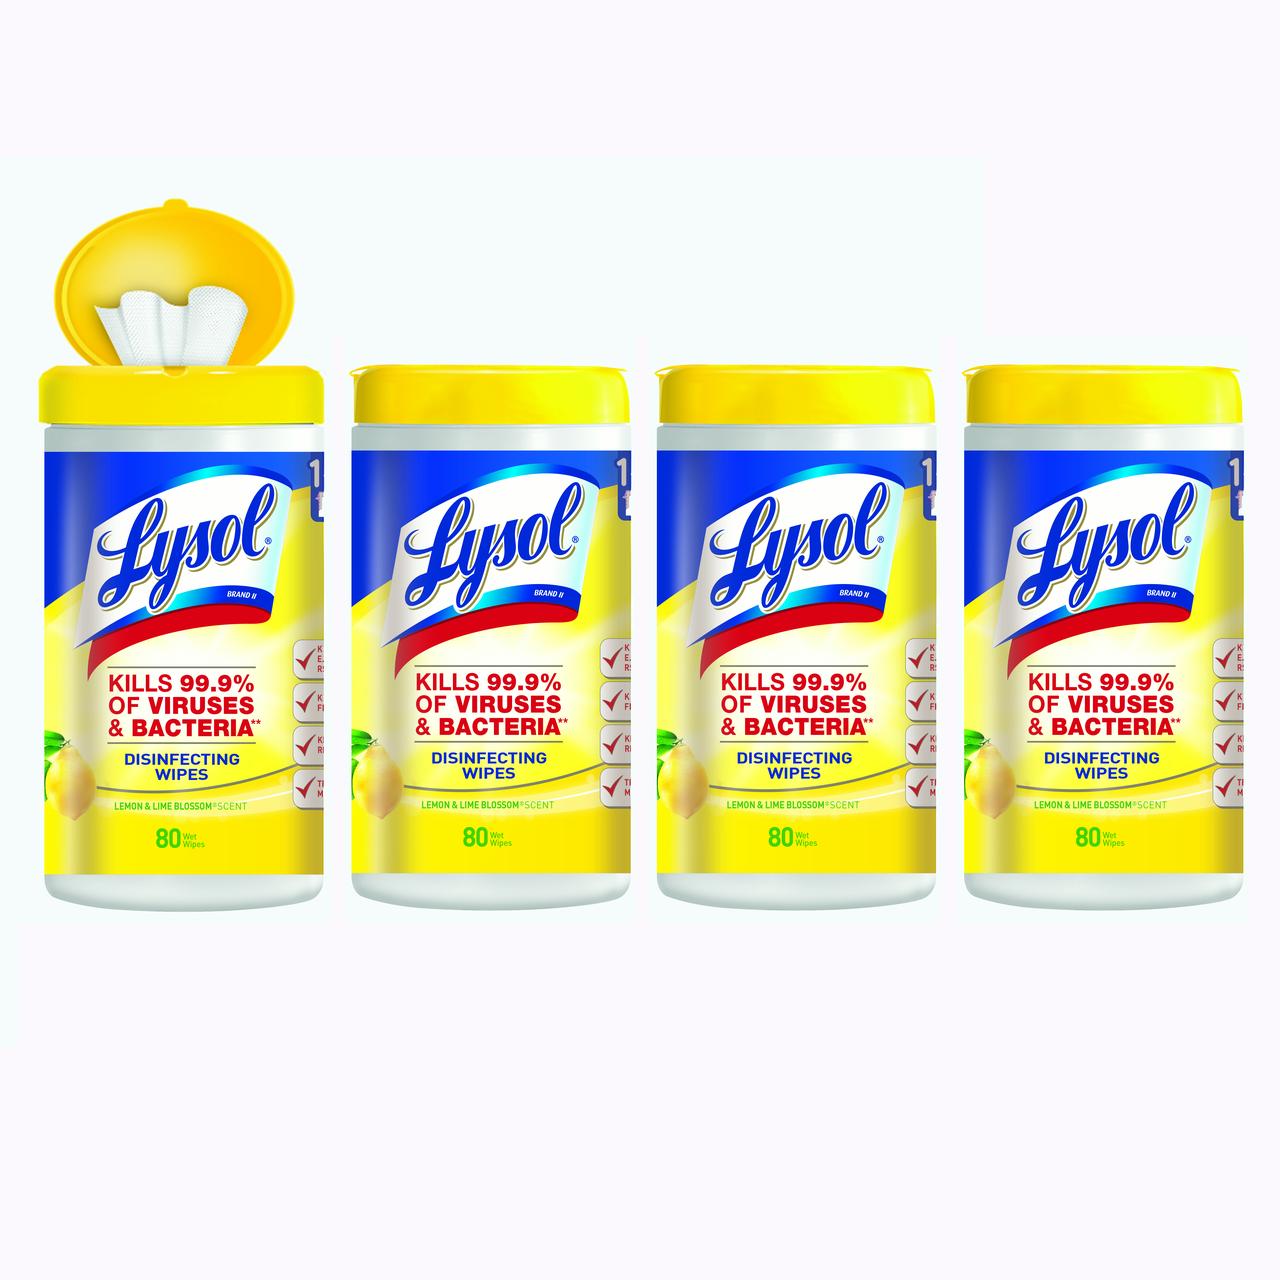 Lysol Disinfecting Wipes, Lemon & Lime Blossom, 320ct (4x80ct), Tested & Proven to Kill COVID-19 Virus, Packaging May Vary - image 2 of 6